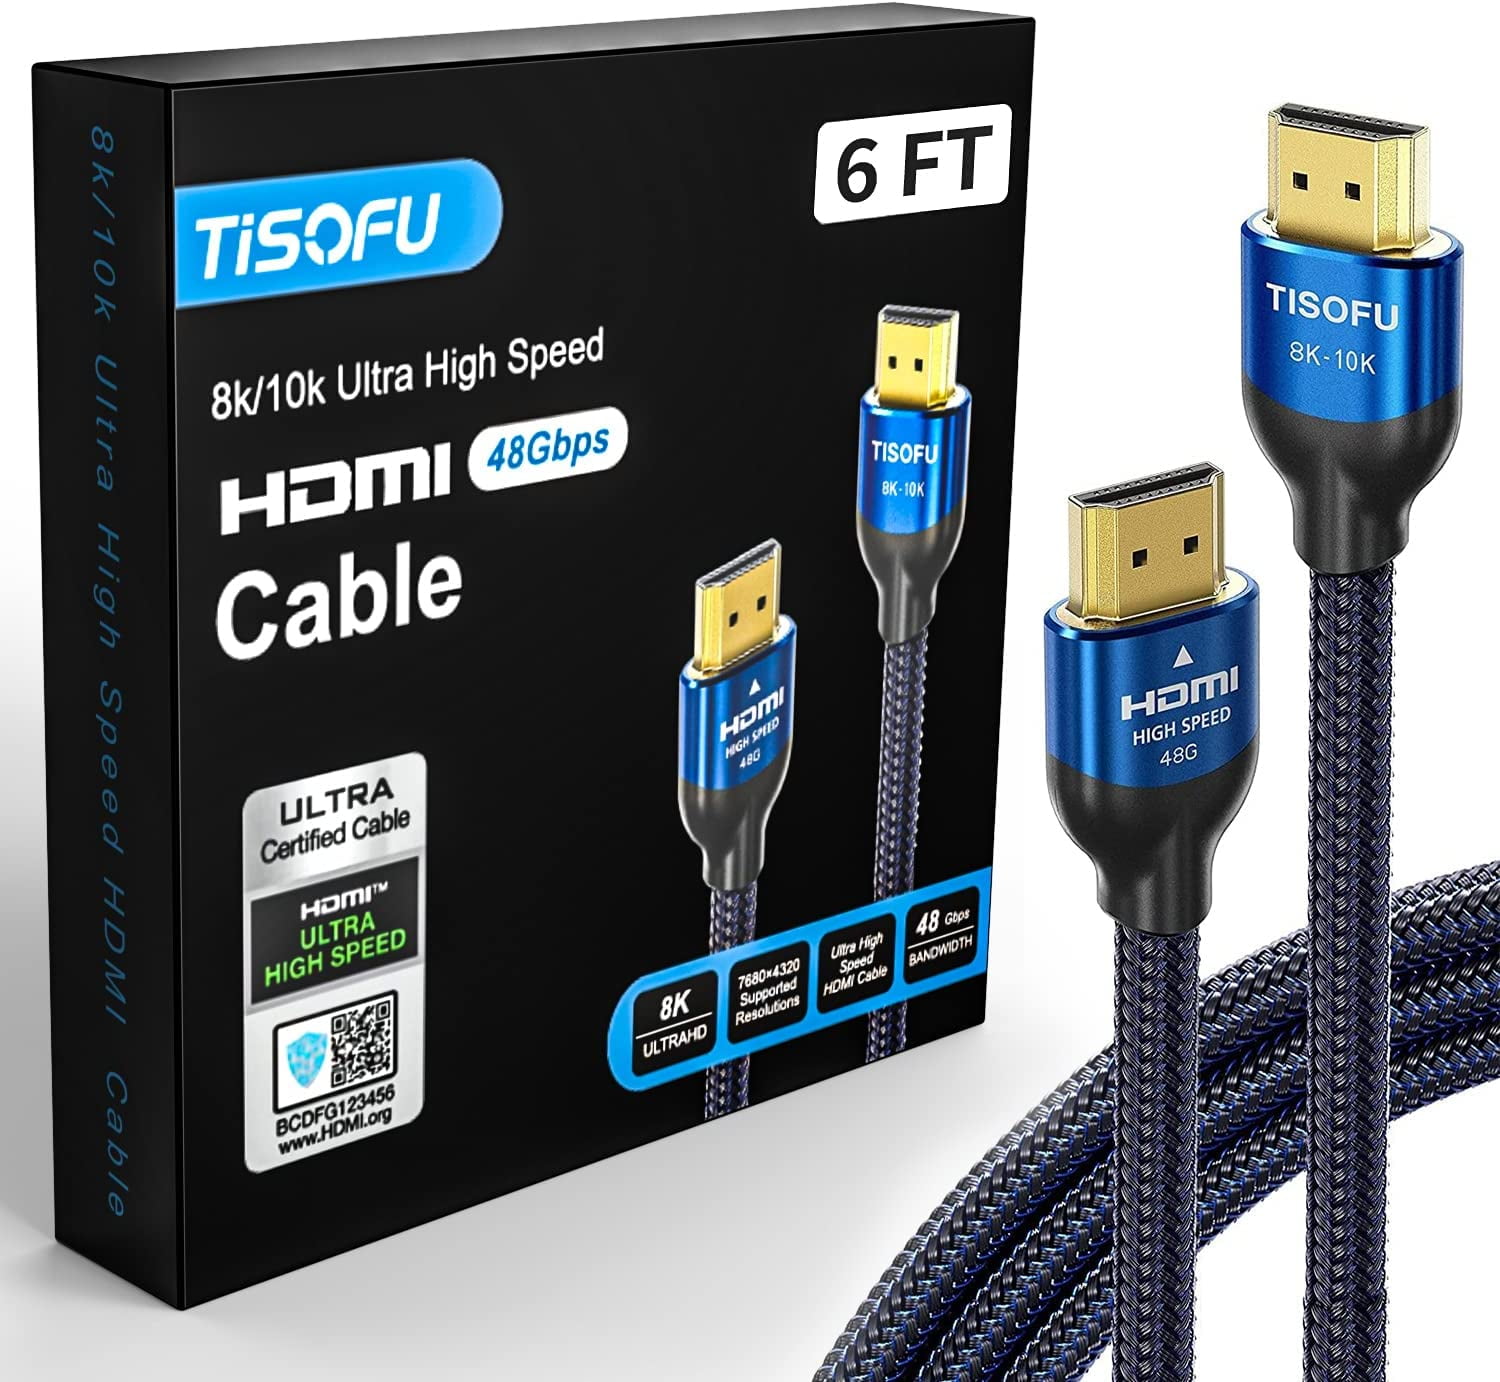 Ultra Certified] 8K HDMI Cable 6FT: HDMI 2.1 Cables 48Gbps High Speed Braided 4K@120Hz 4K@144Hz HDCP 2.2&2.3 CL3 ARC eARC - HD/HDR/HDTV/PS5/PS4/Xbox - Walmart.com